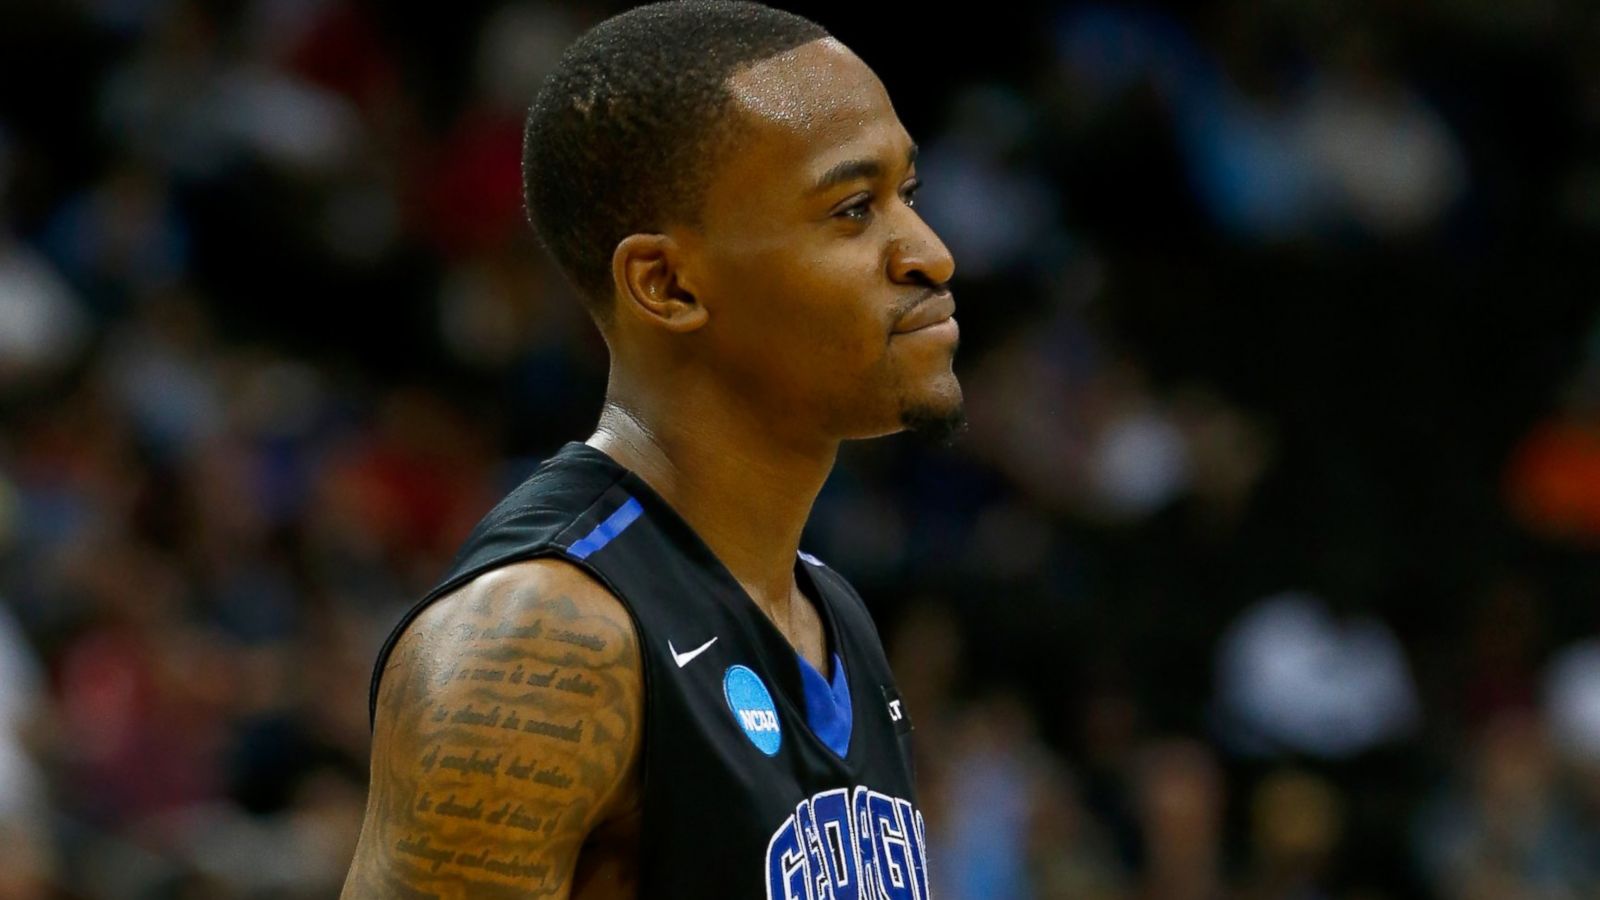 5 basketball players who suffered gruesome leg injuries including Kevin Ware